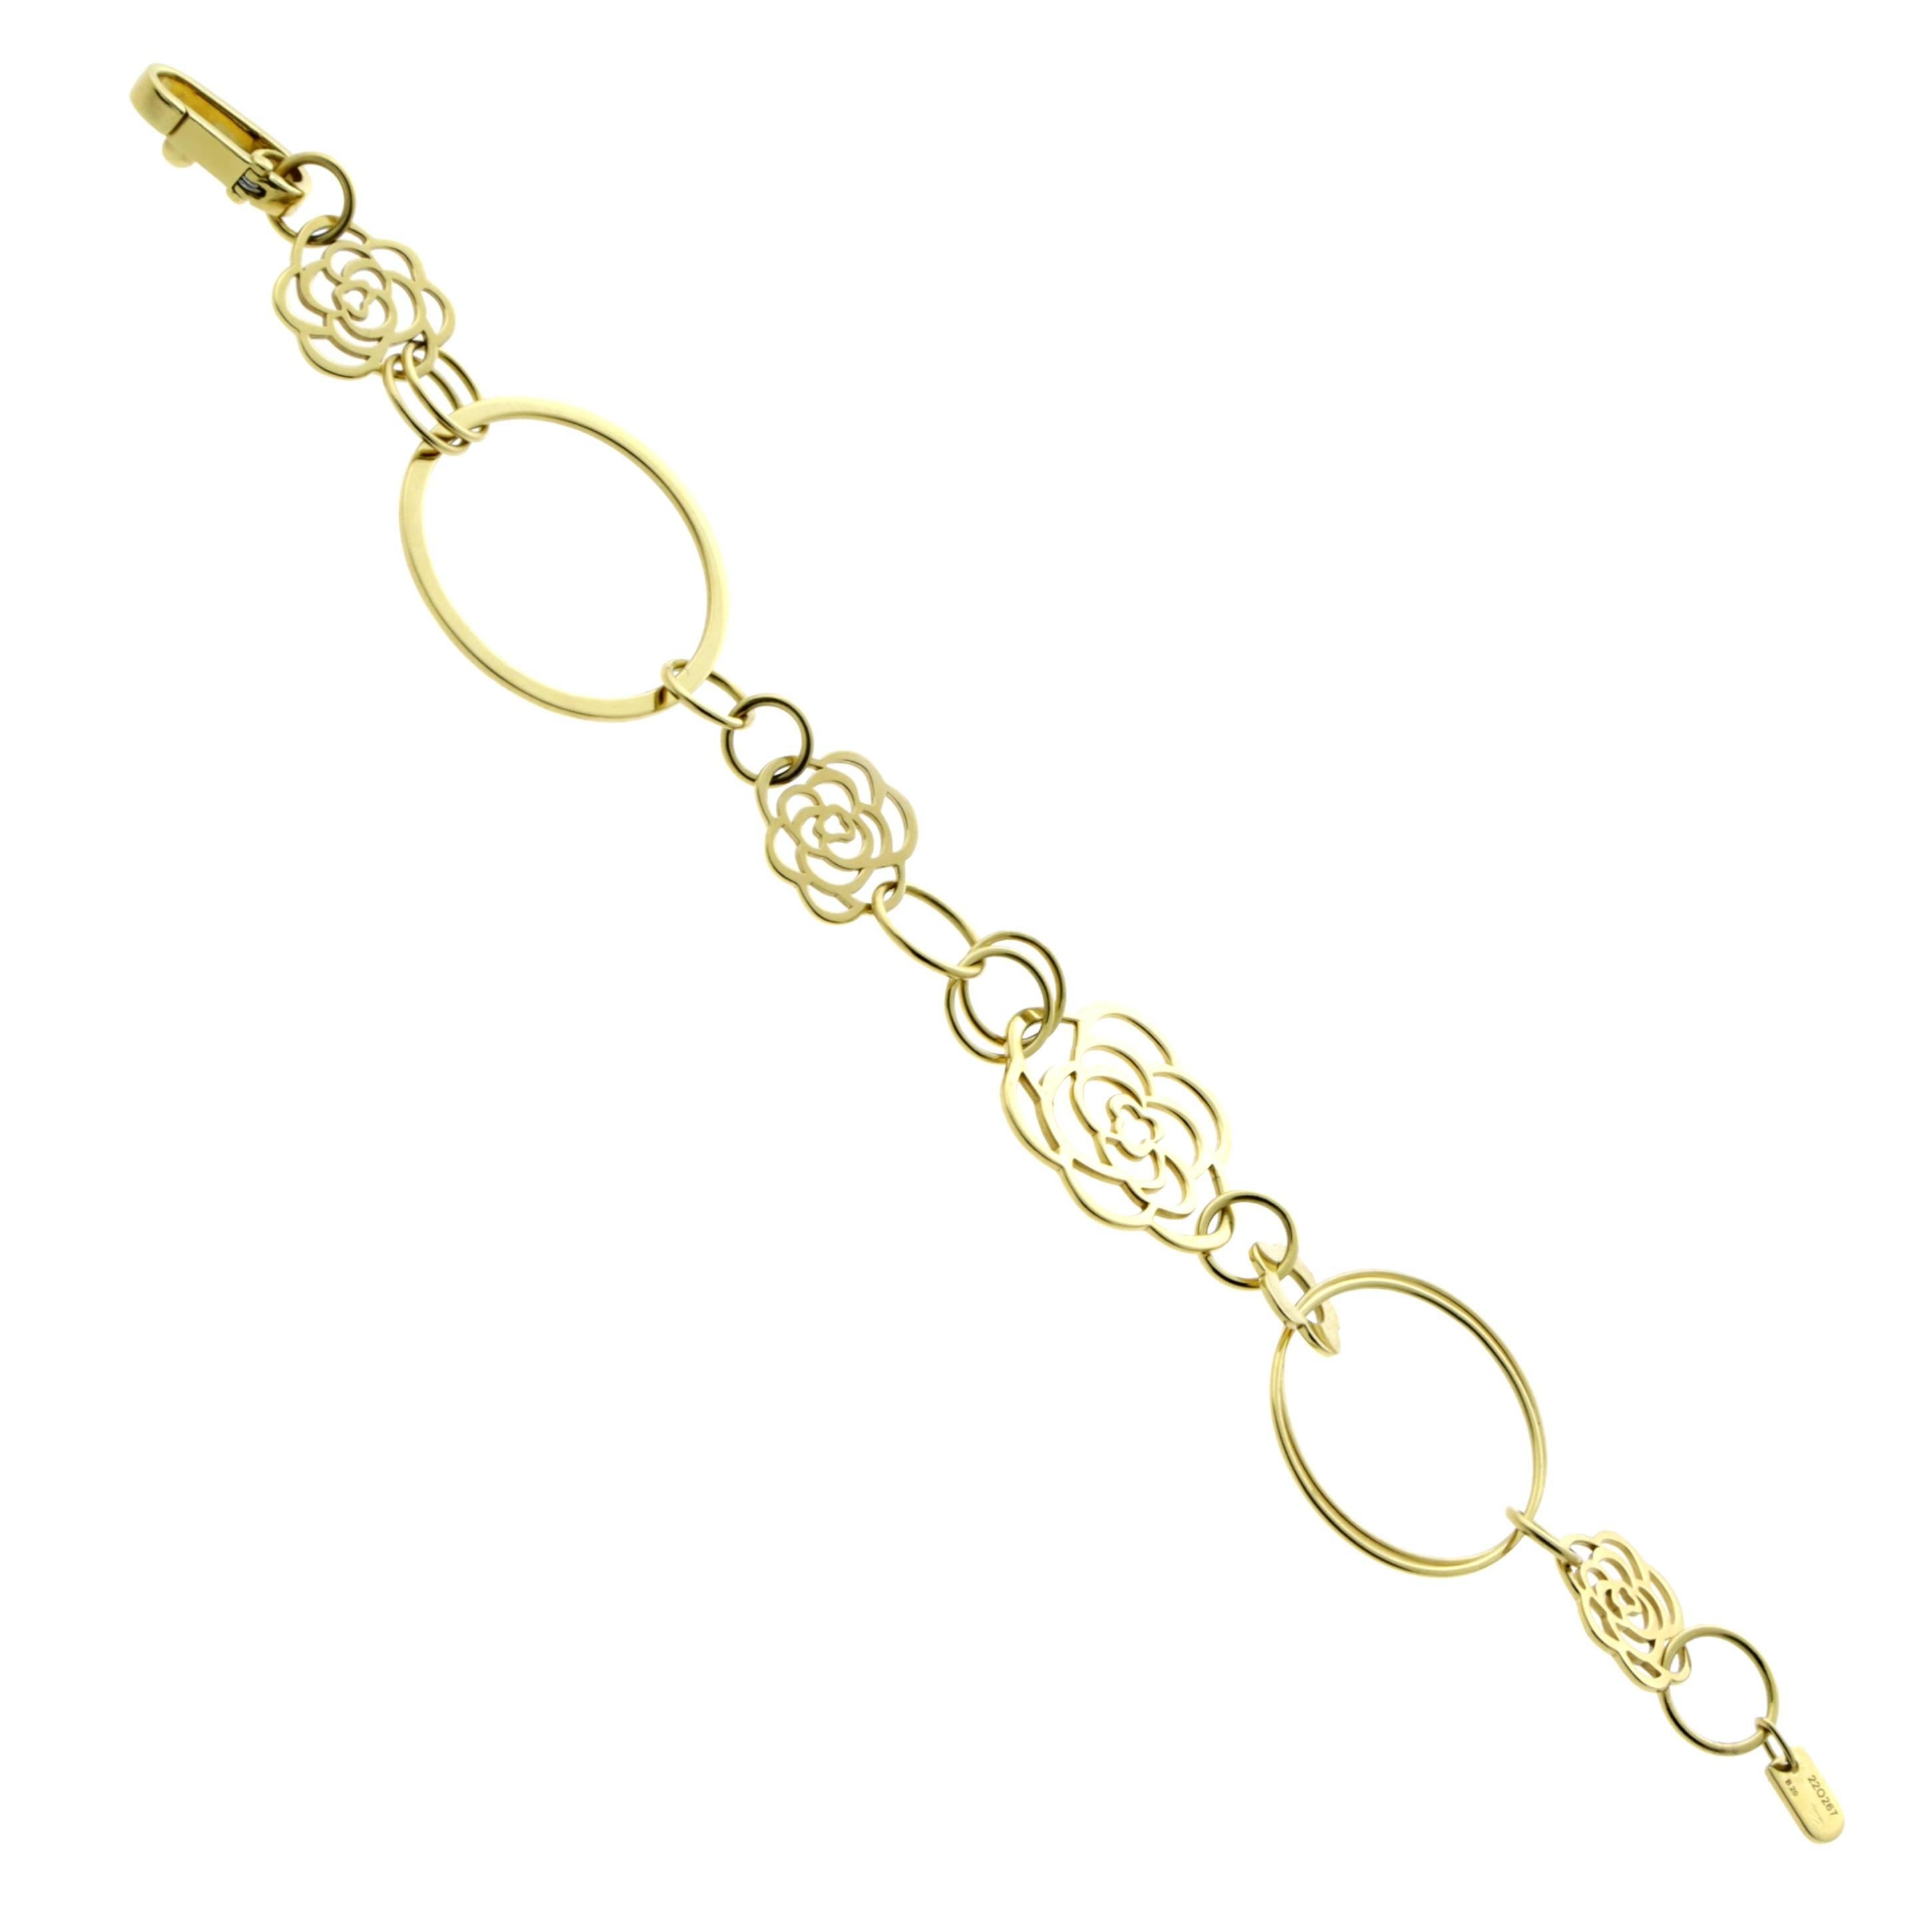 A chic authentic Chanel bracelet featuring the iconic Camellia flower in various sizes set in 18k yellow gold.